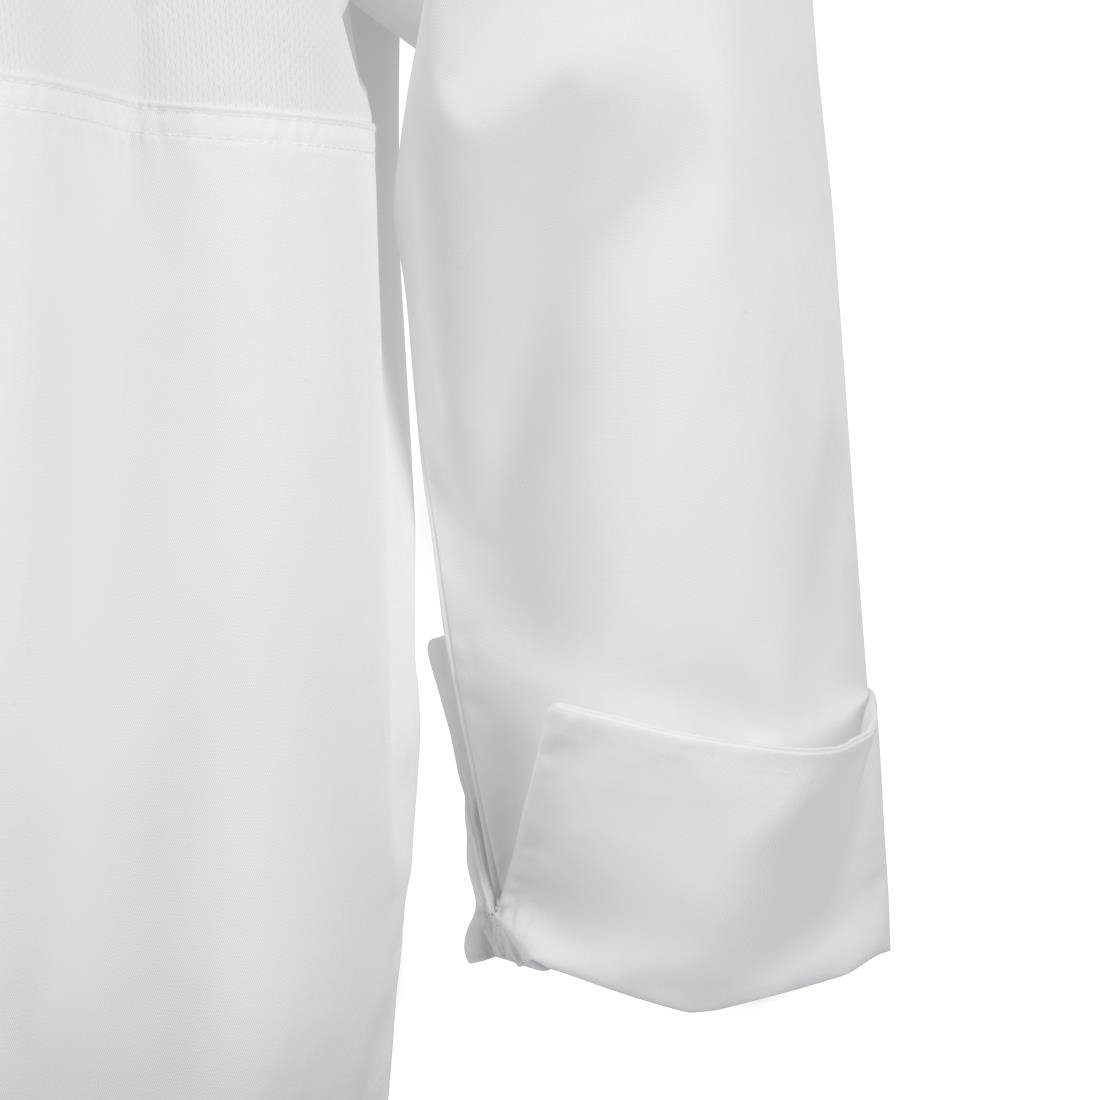 B649-S Chef Works Calgary Long Sleeve Cool Vent Unisex Chefs Jacket White S JD Catering Equipment Solutions Ltd